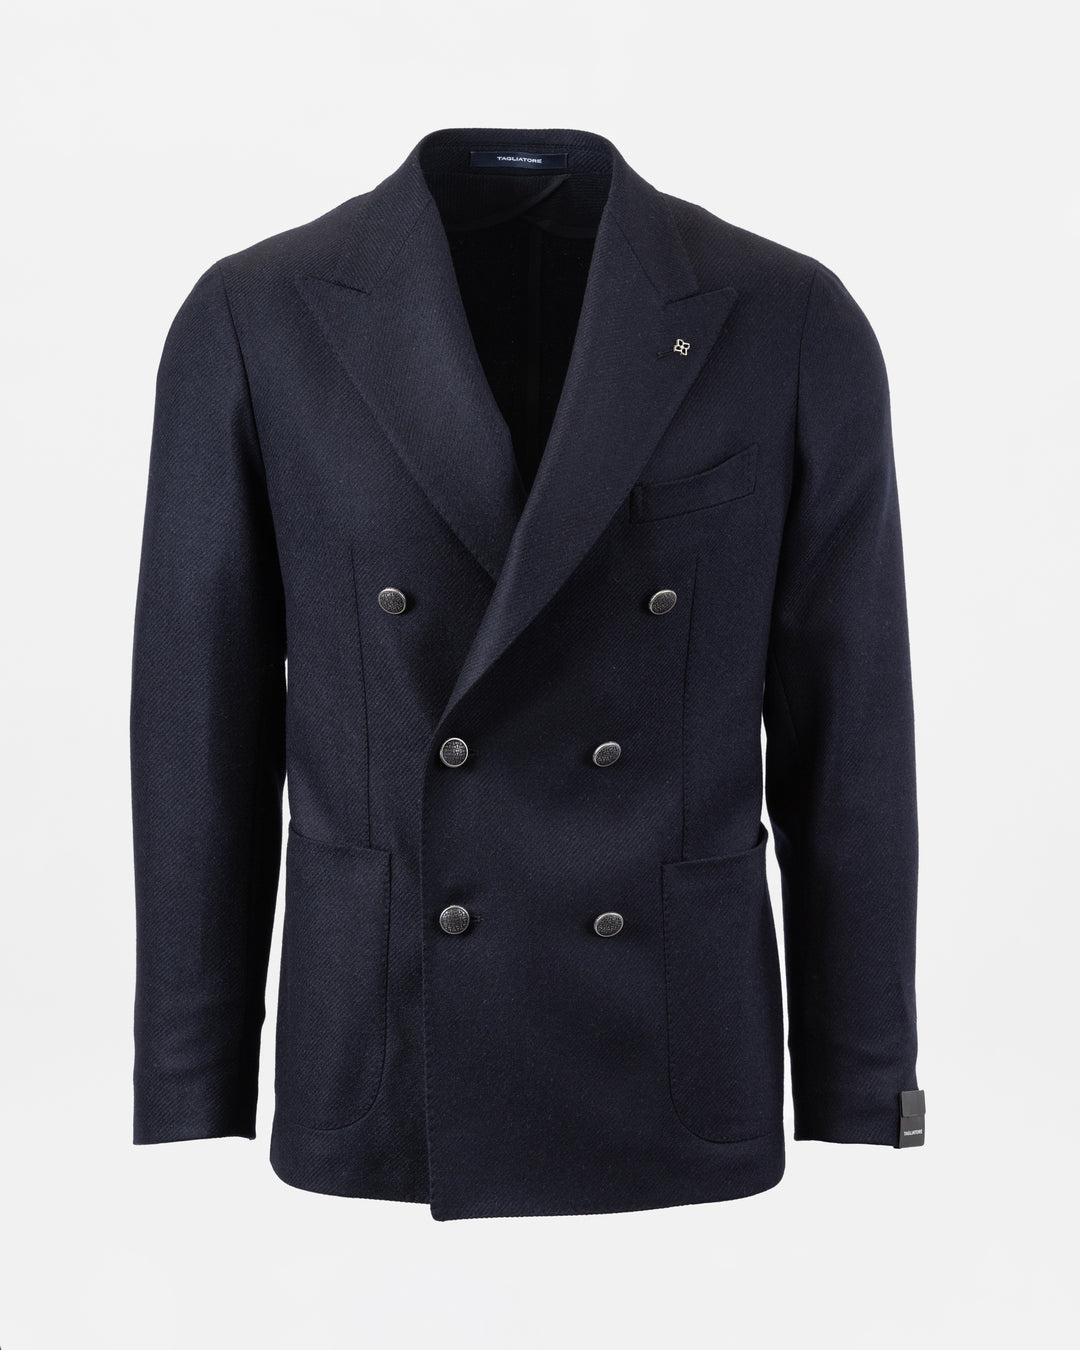 Double Breasted Blazer - Navy Wool Cashmere